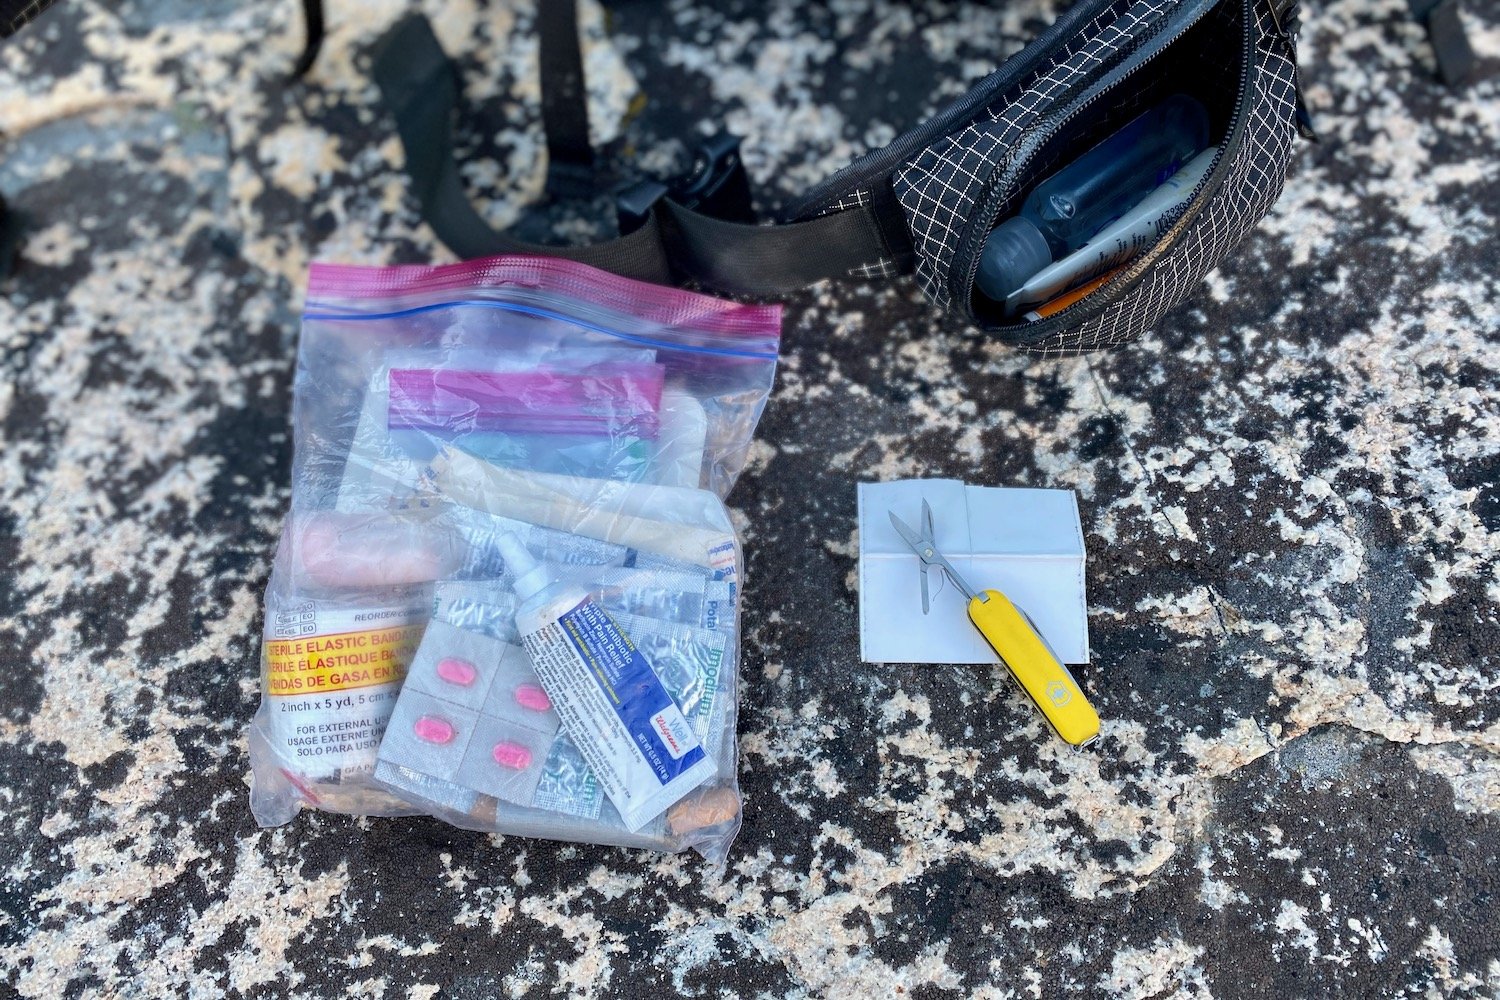 Closeup of a backpacker's custom first aid kit in a Ziploc bag and the Swiss Army Classic multitool